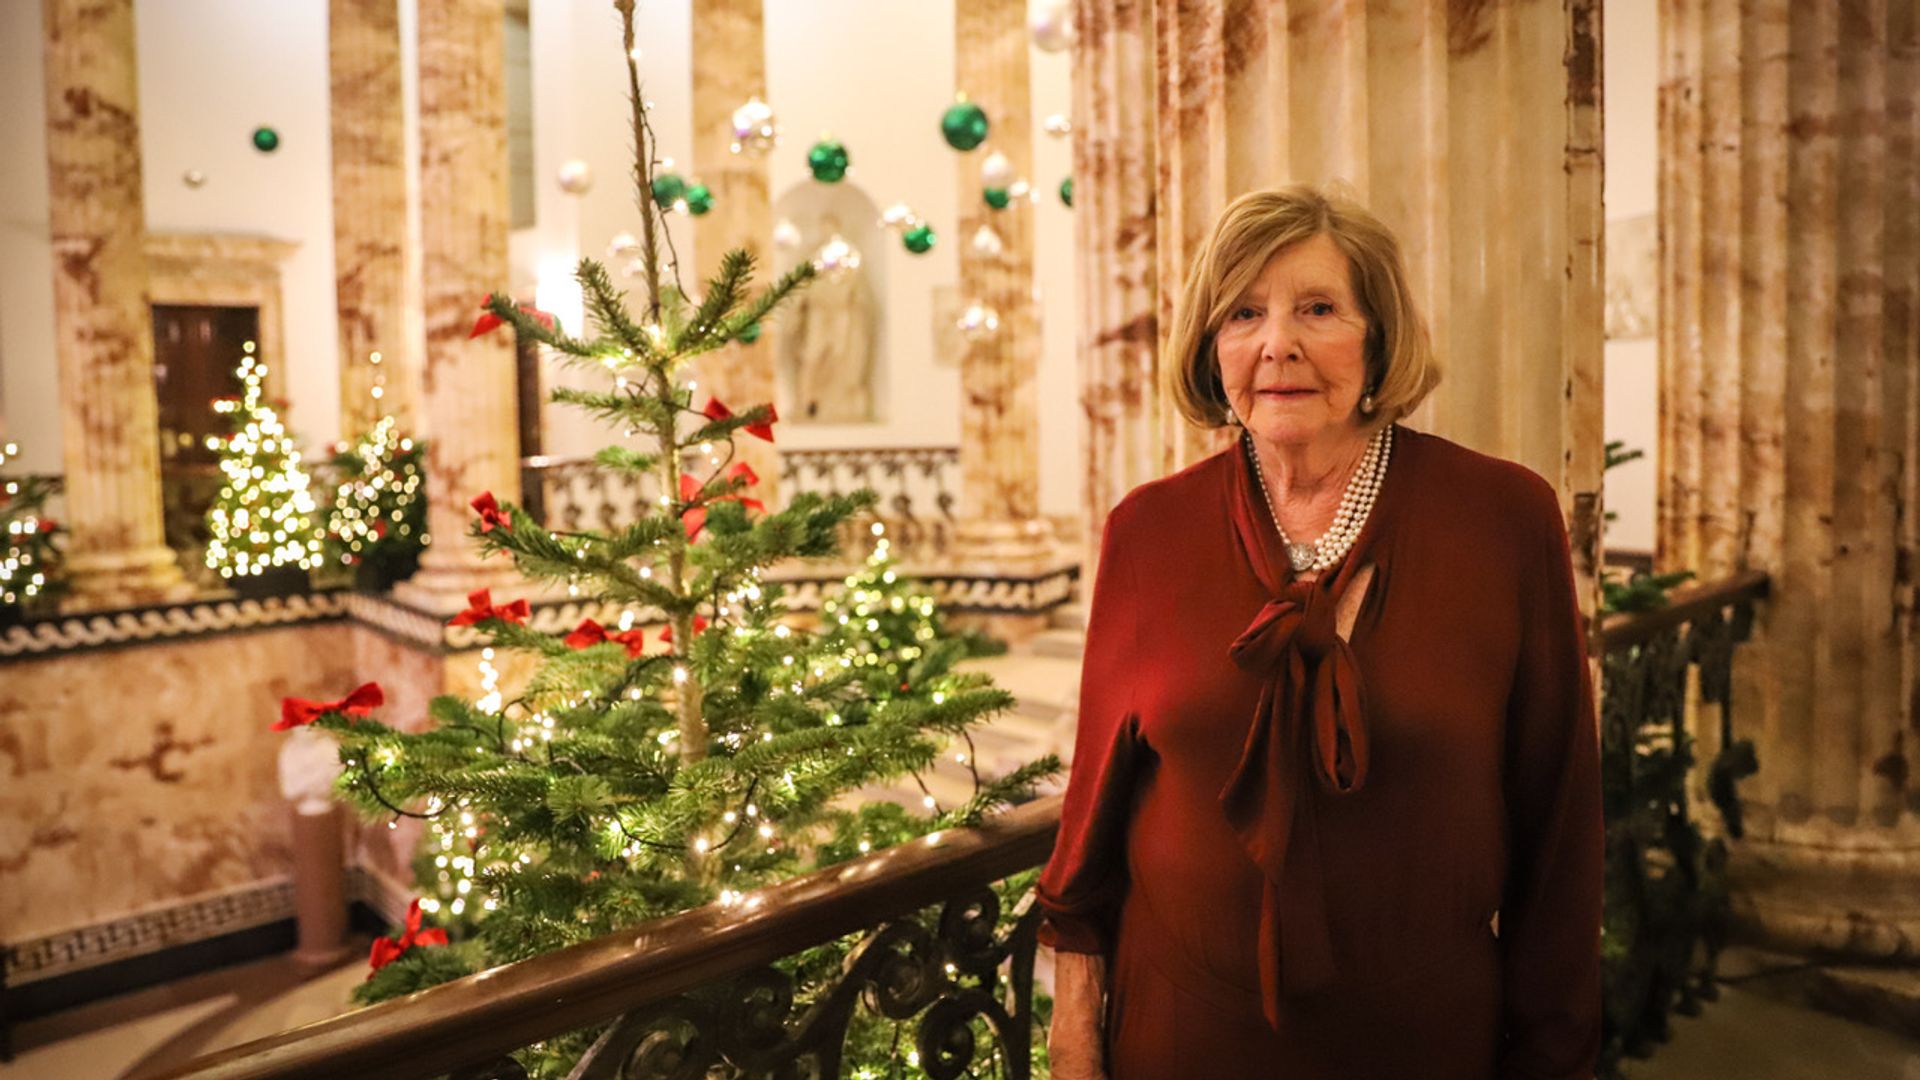 Lady Anne Glenconner in front of Christmas tree at Holkham Hall